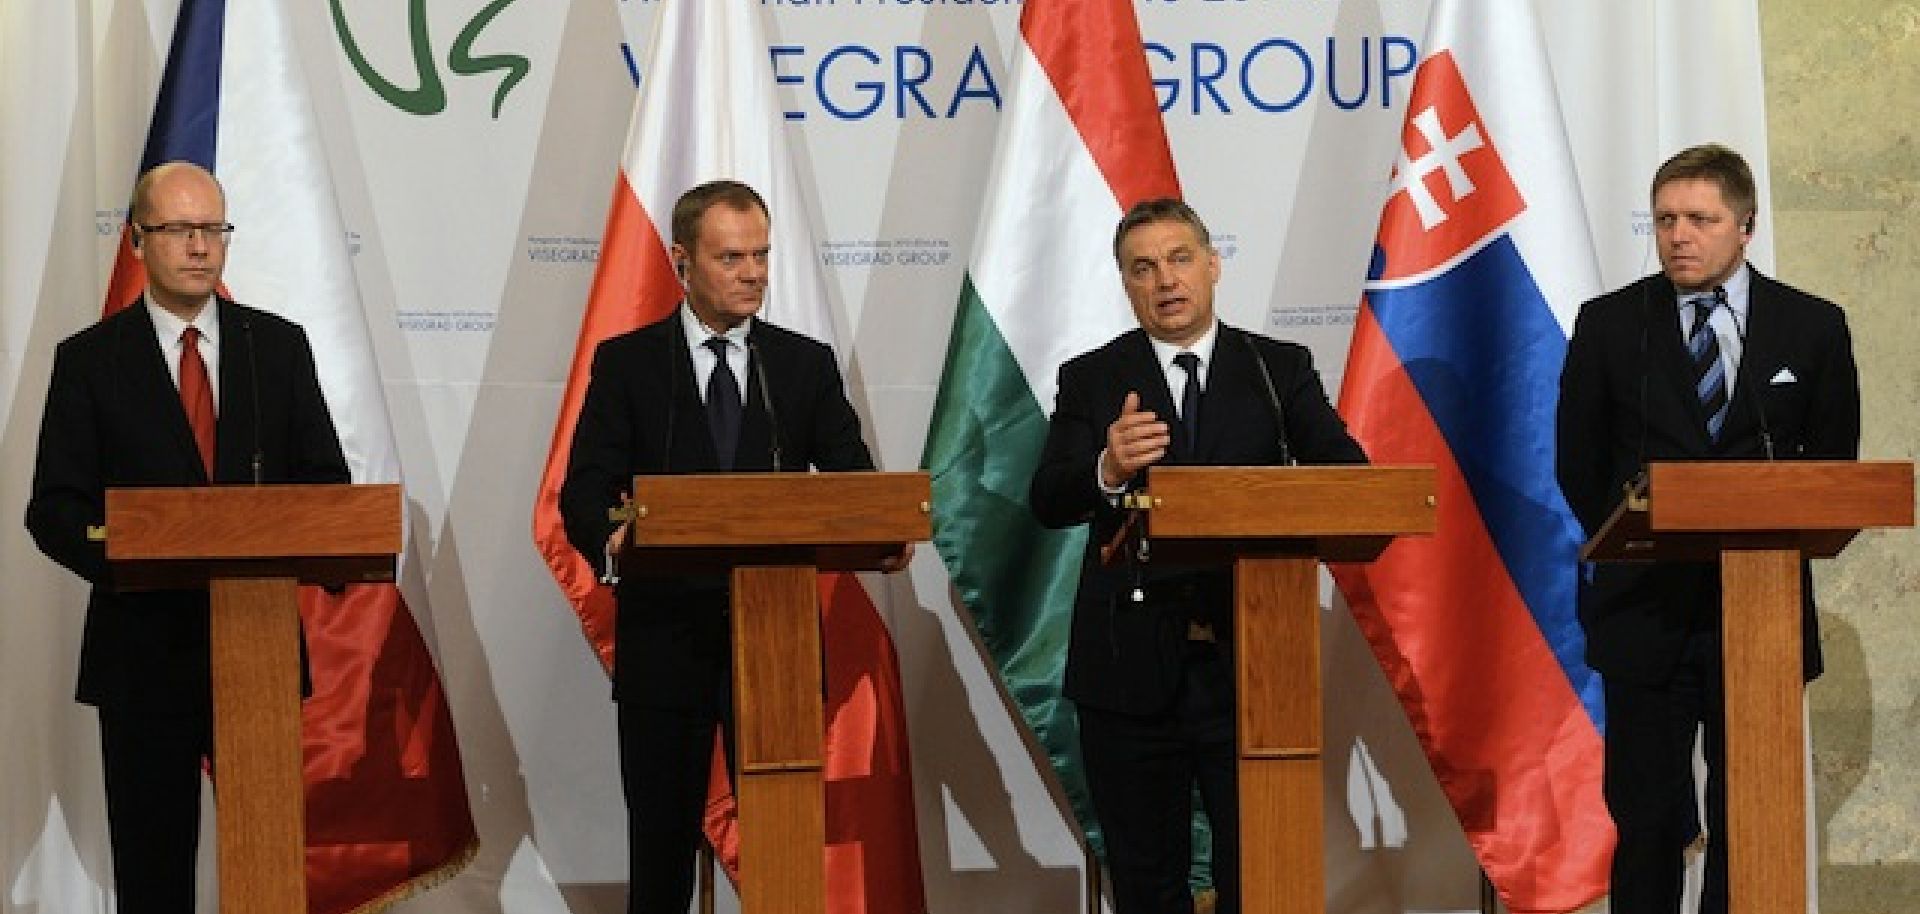 Ukraine's Crisis Gives New Impetus to the Visegrad Group